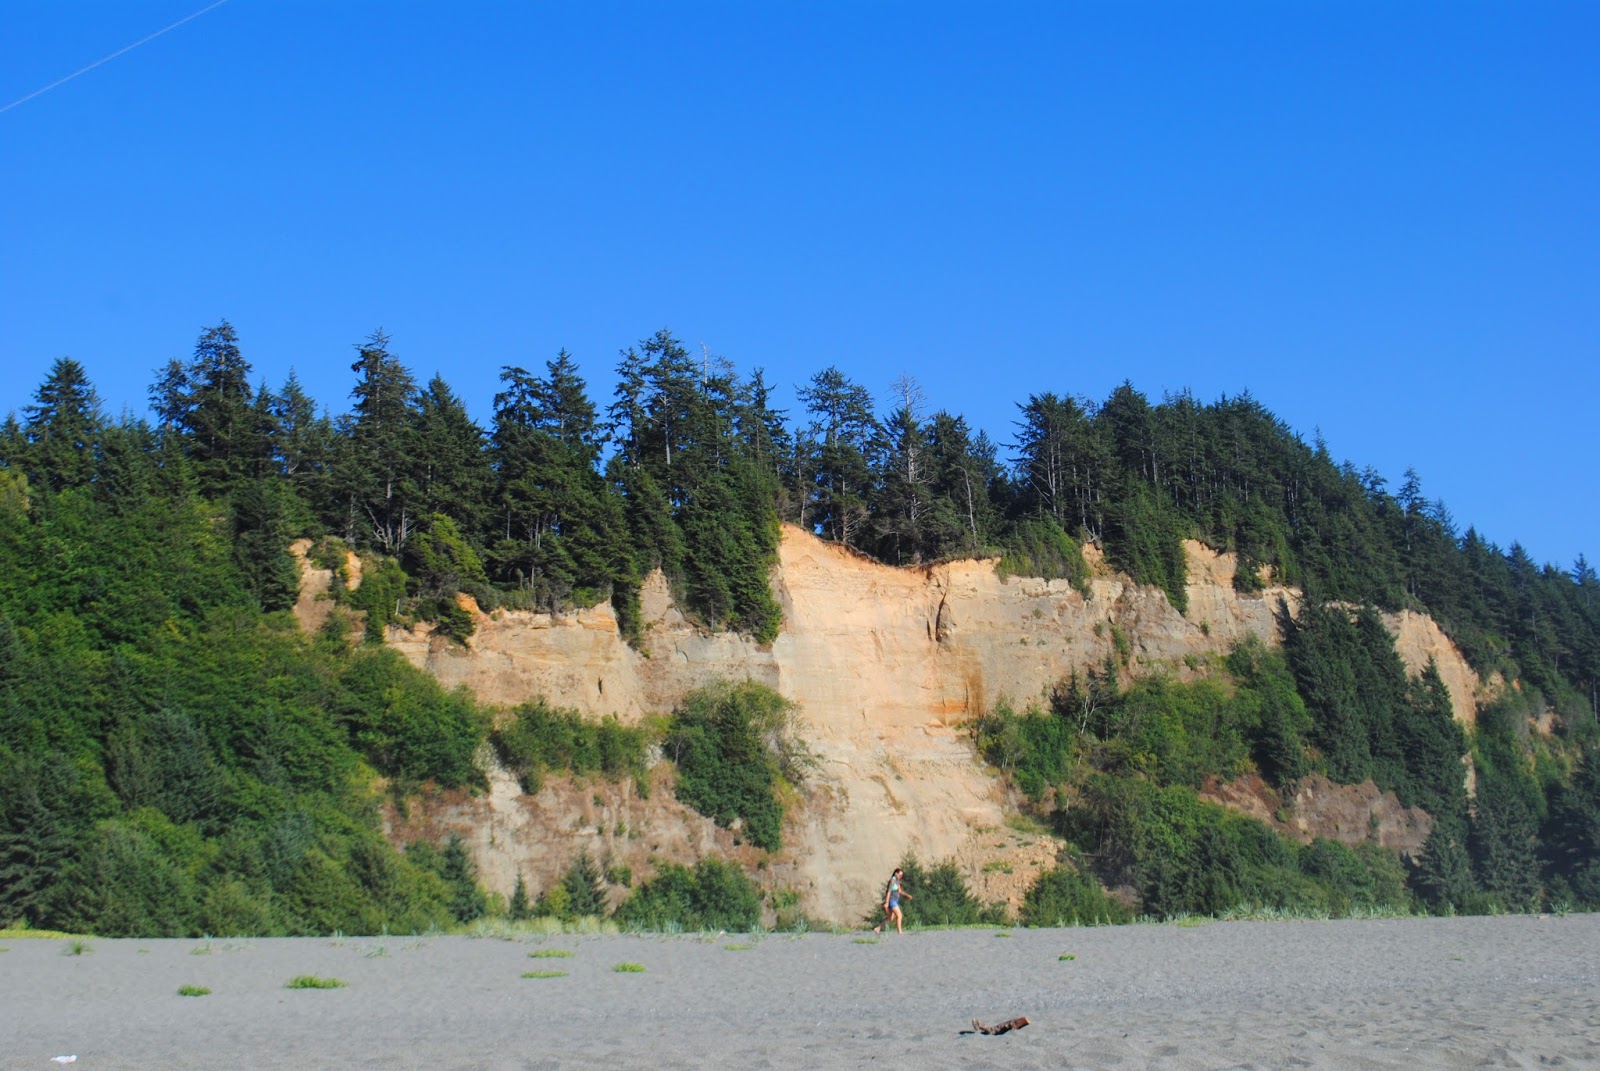 GOLD BLUFFS BEACH - What to do in Southern Oregon - Things to do - Norhtern California - Camping - Day TRip - Kid-Friendly - Beaches